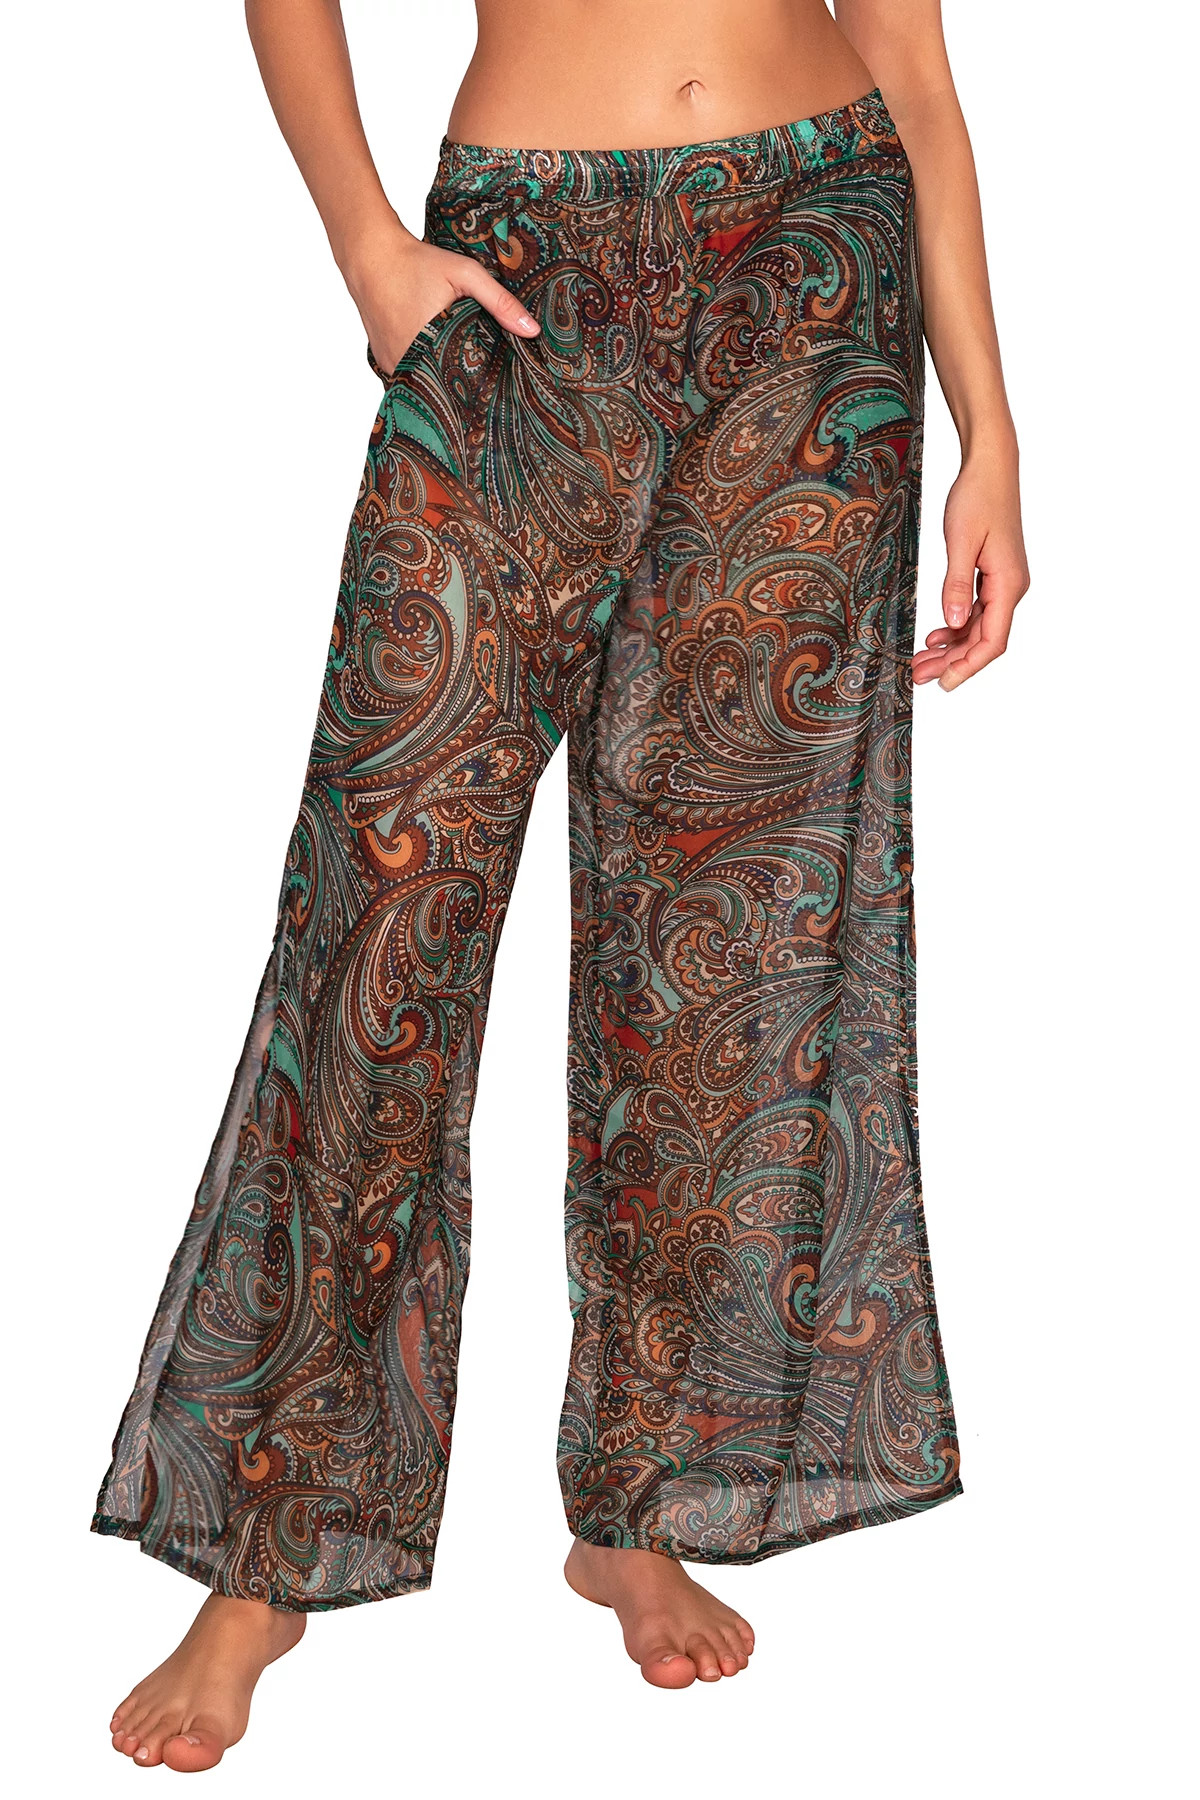 ANDALUSIA Breezy Beach Pant image number 1